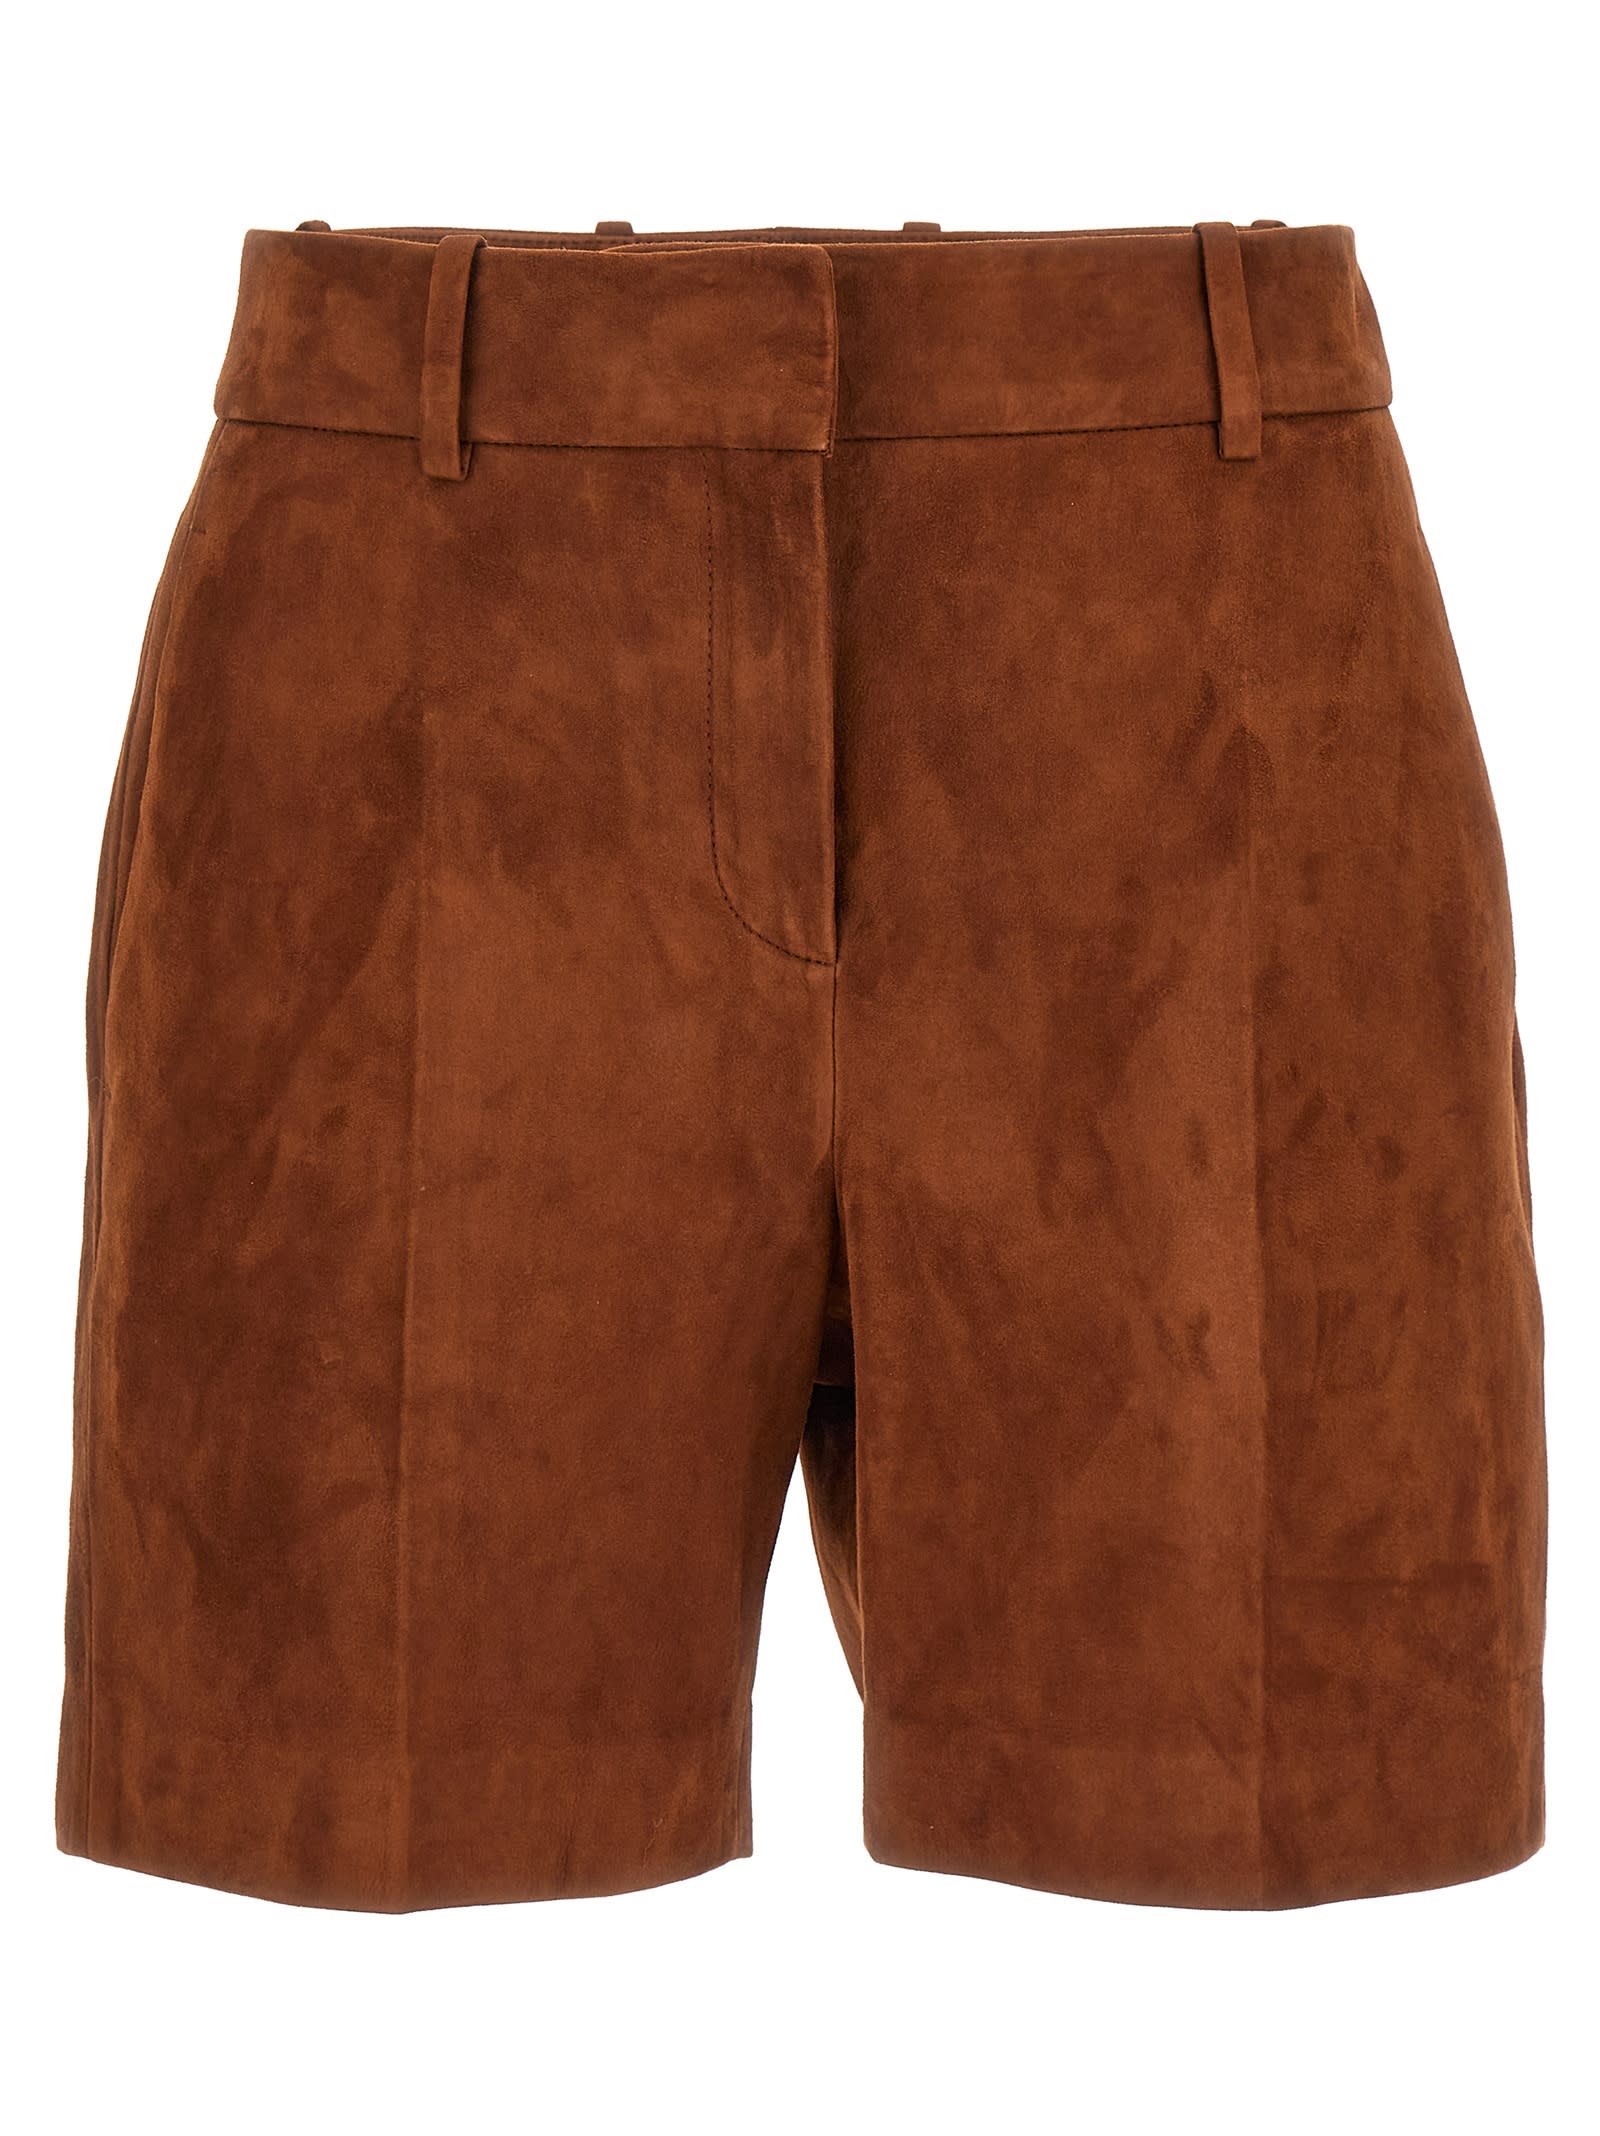 Shorts In Brown Suede